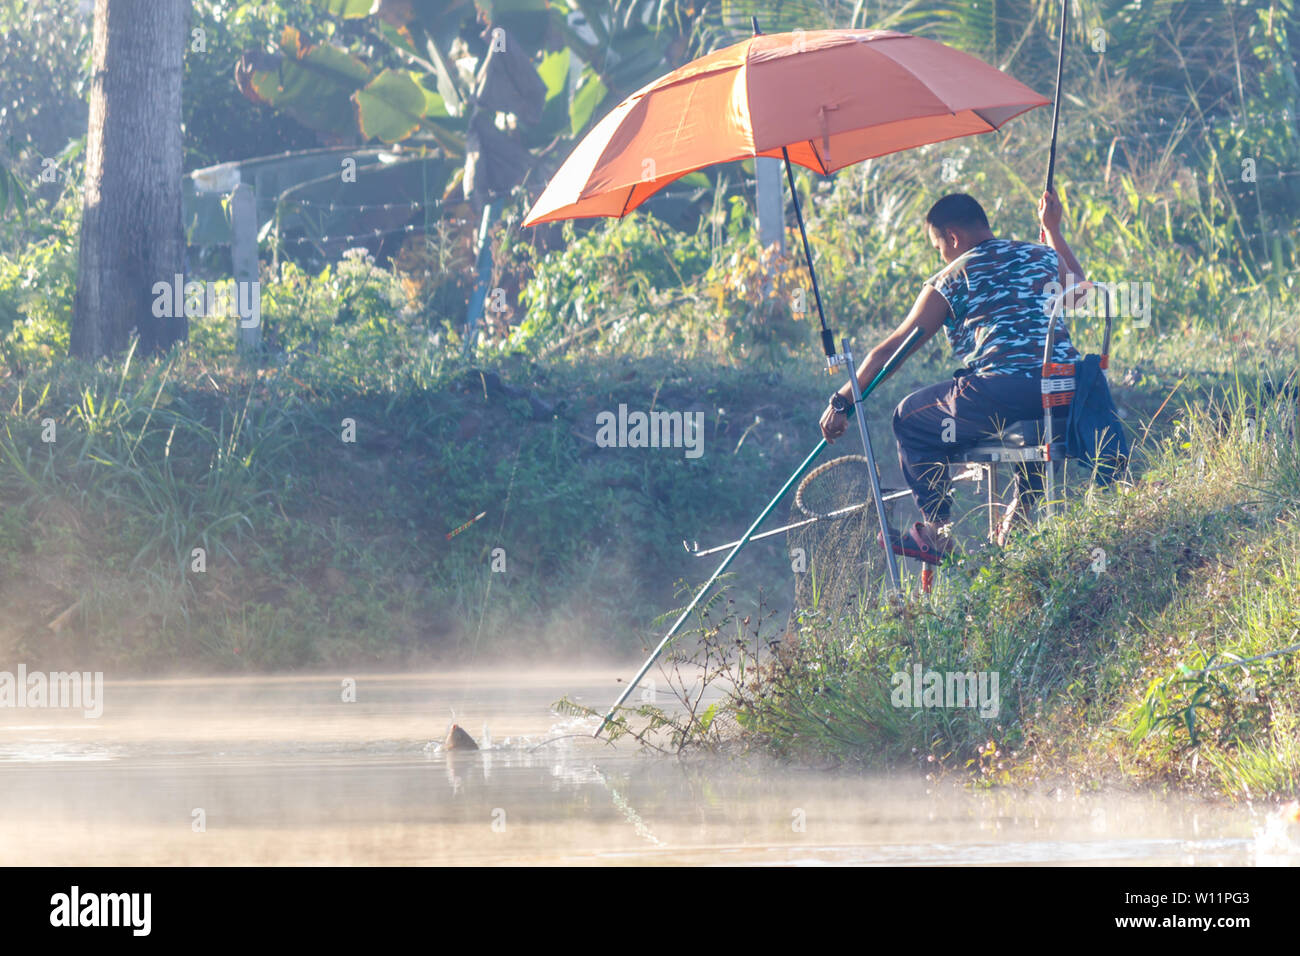 FANG,CHIANG MAI/THAILAND - DECEMBER 22,2018: Fishermen catch fish at the lake in the morning with beautiful sky Stock Photo